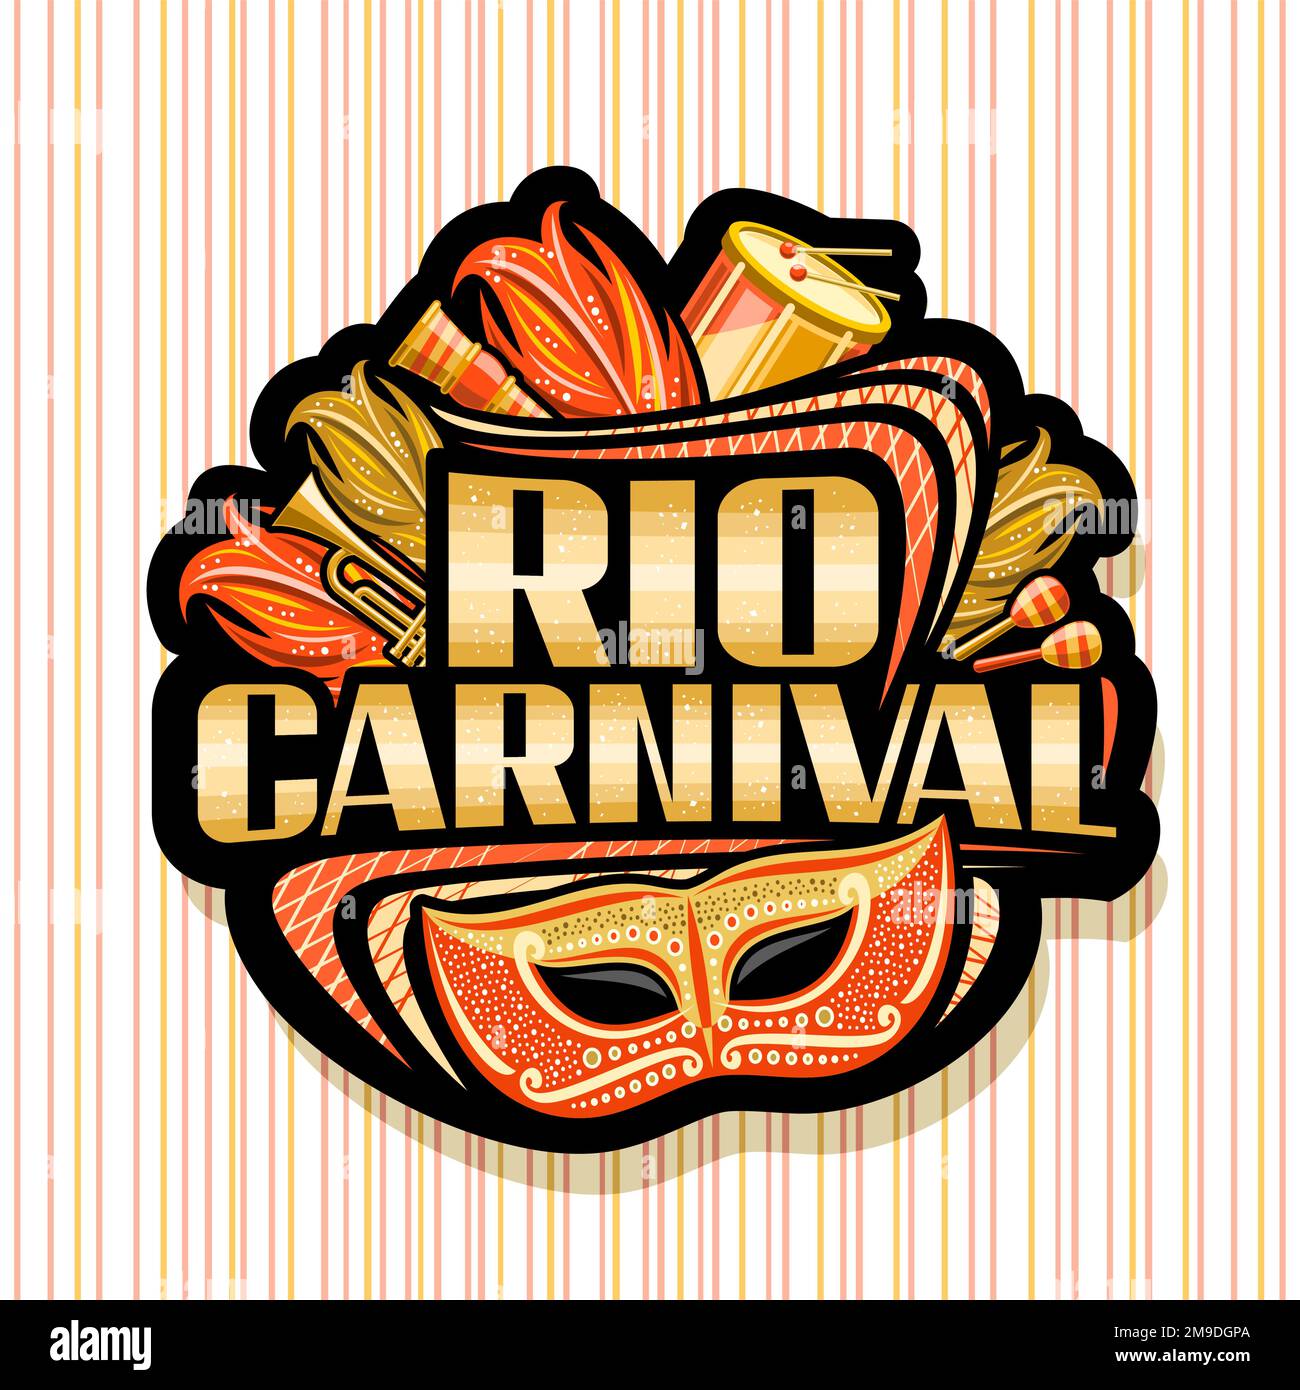 Vector logo for Rio Carnival, dark decorative label with illustration of orange venice mask, street musical instruments, carnival feathers, yellow let Stock Vector